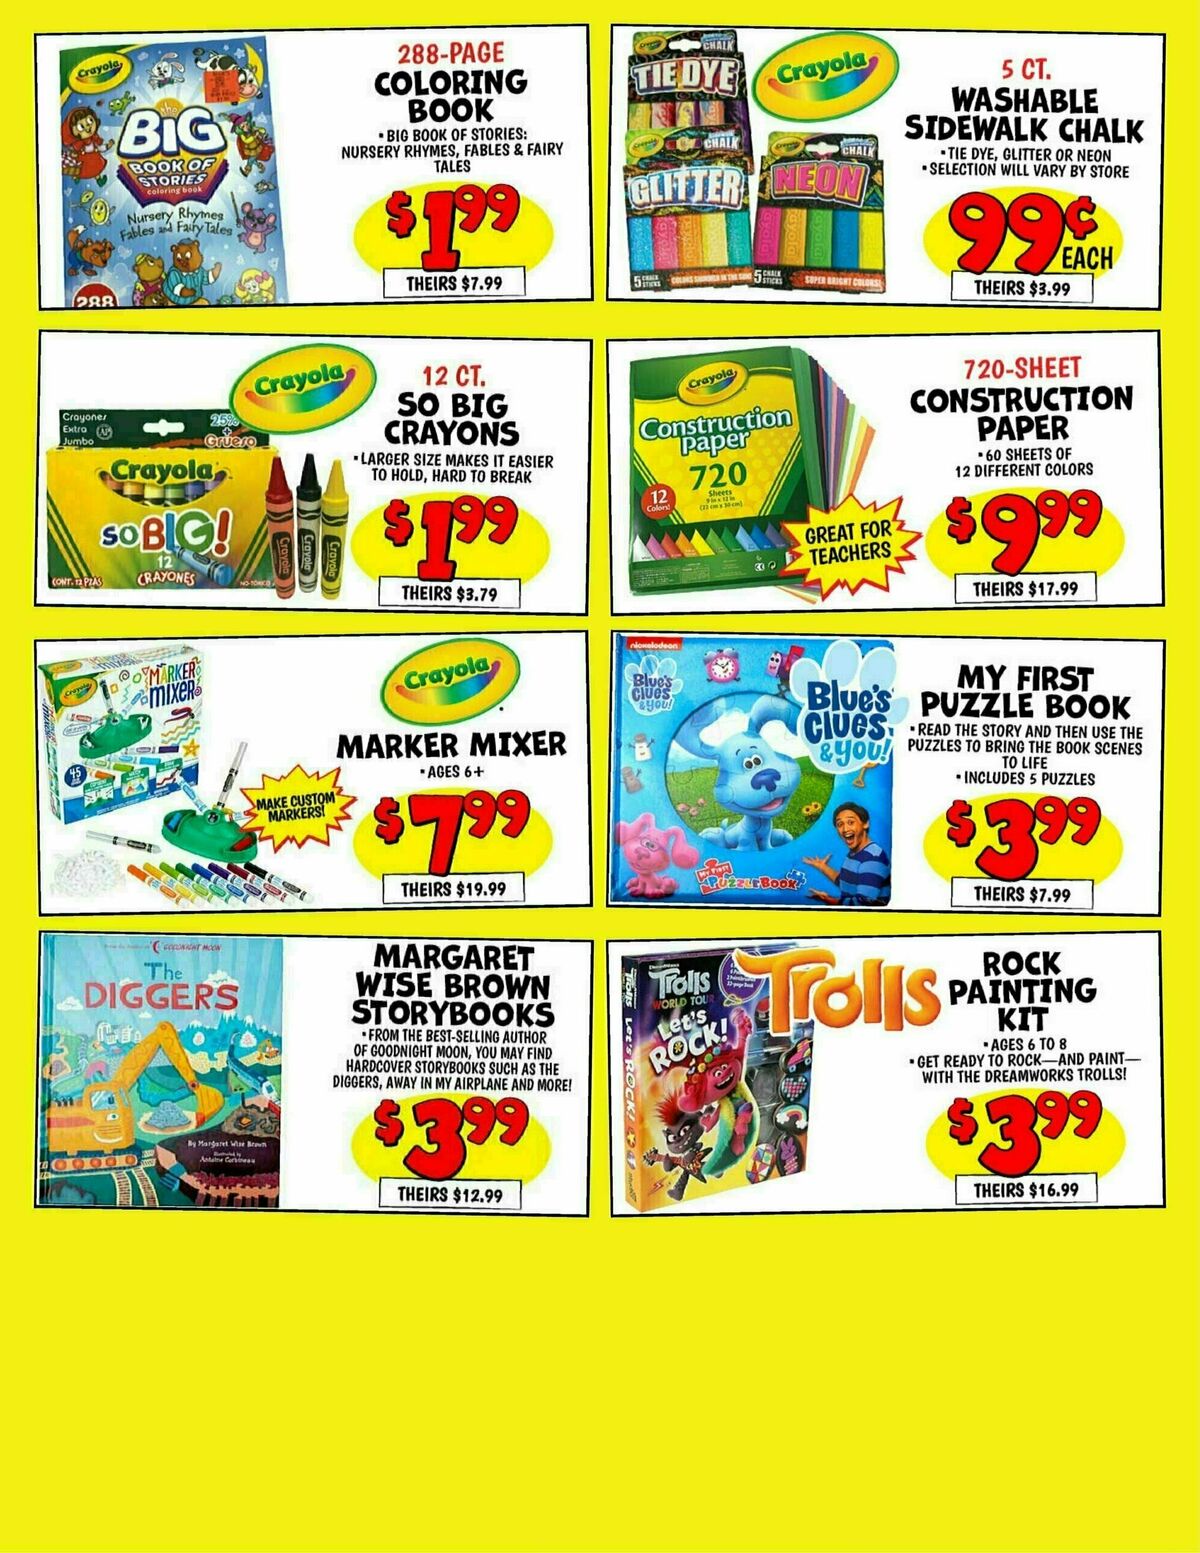 Ollie's Bargain Outlet Weekly Ad from October 21